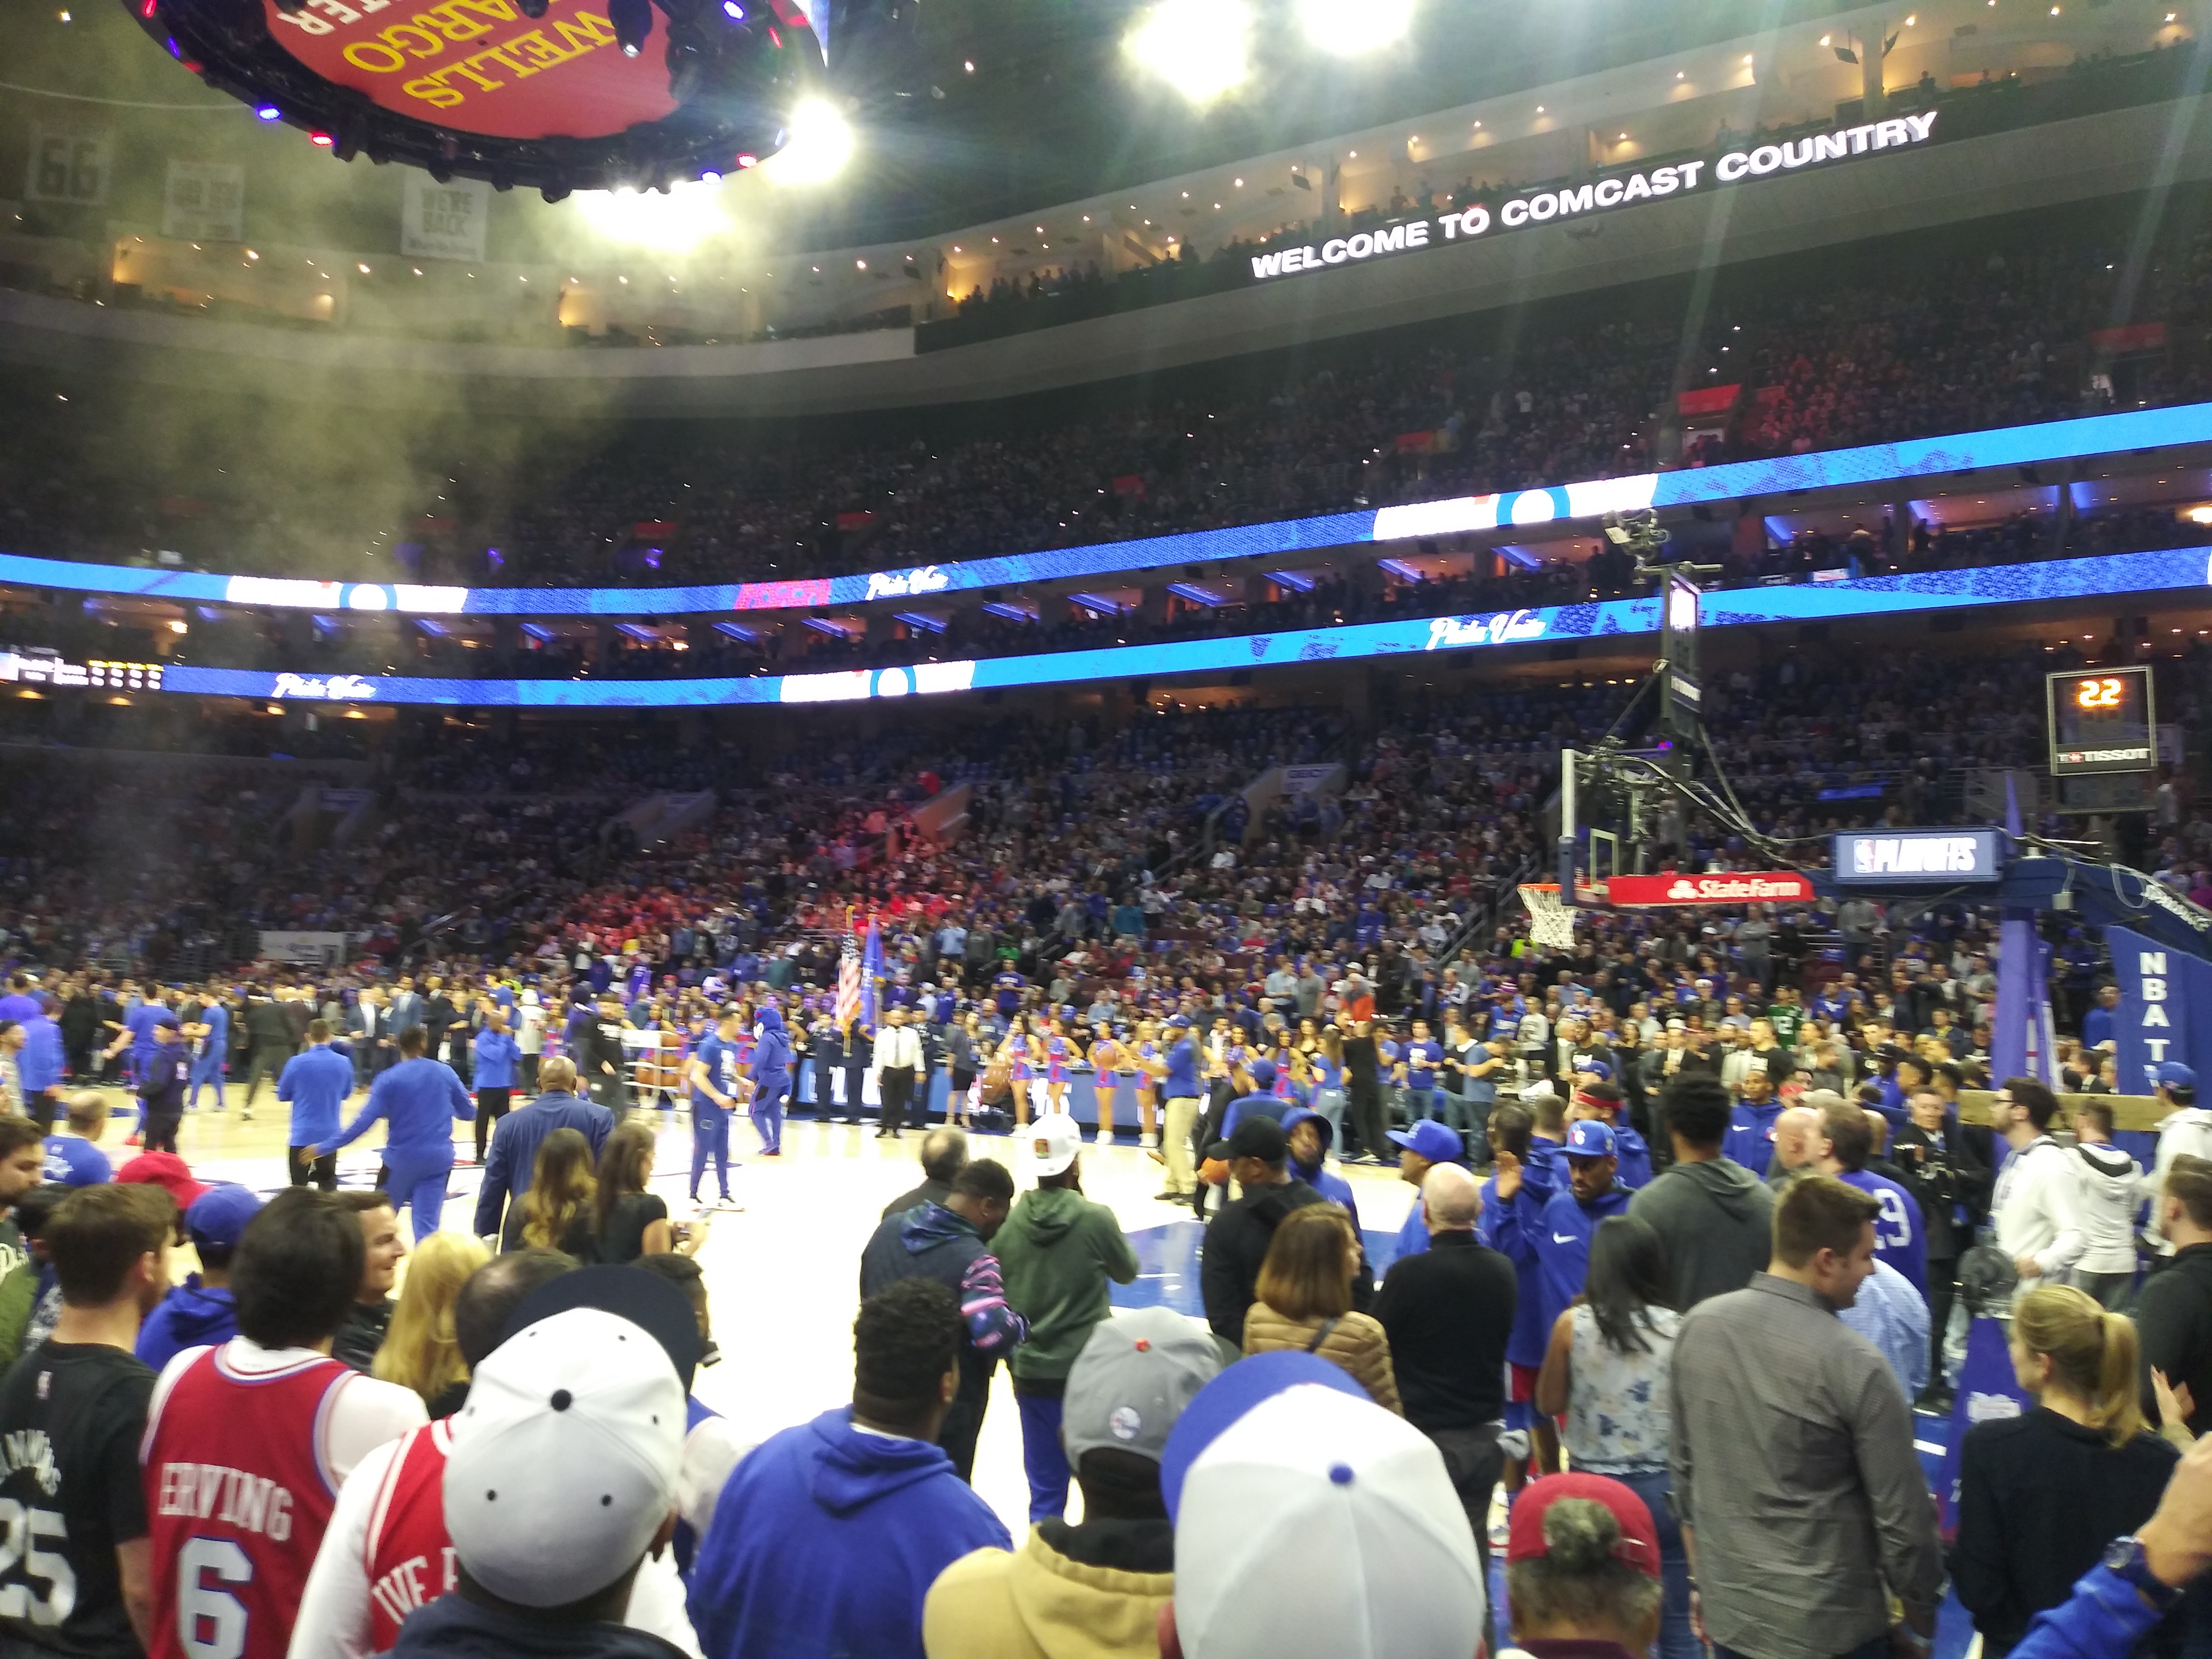 76ers game